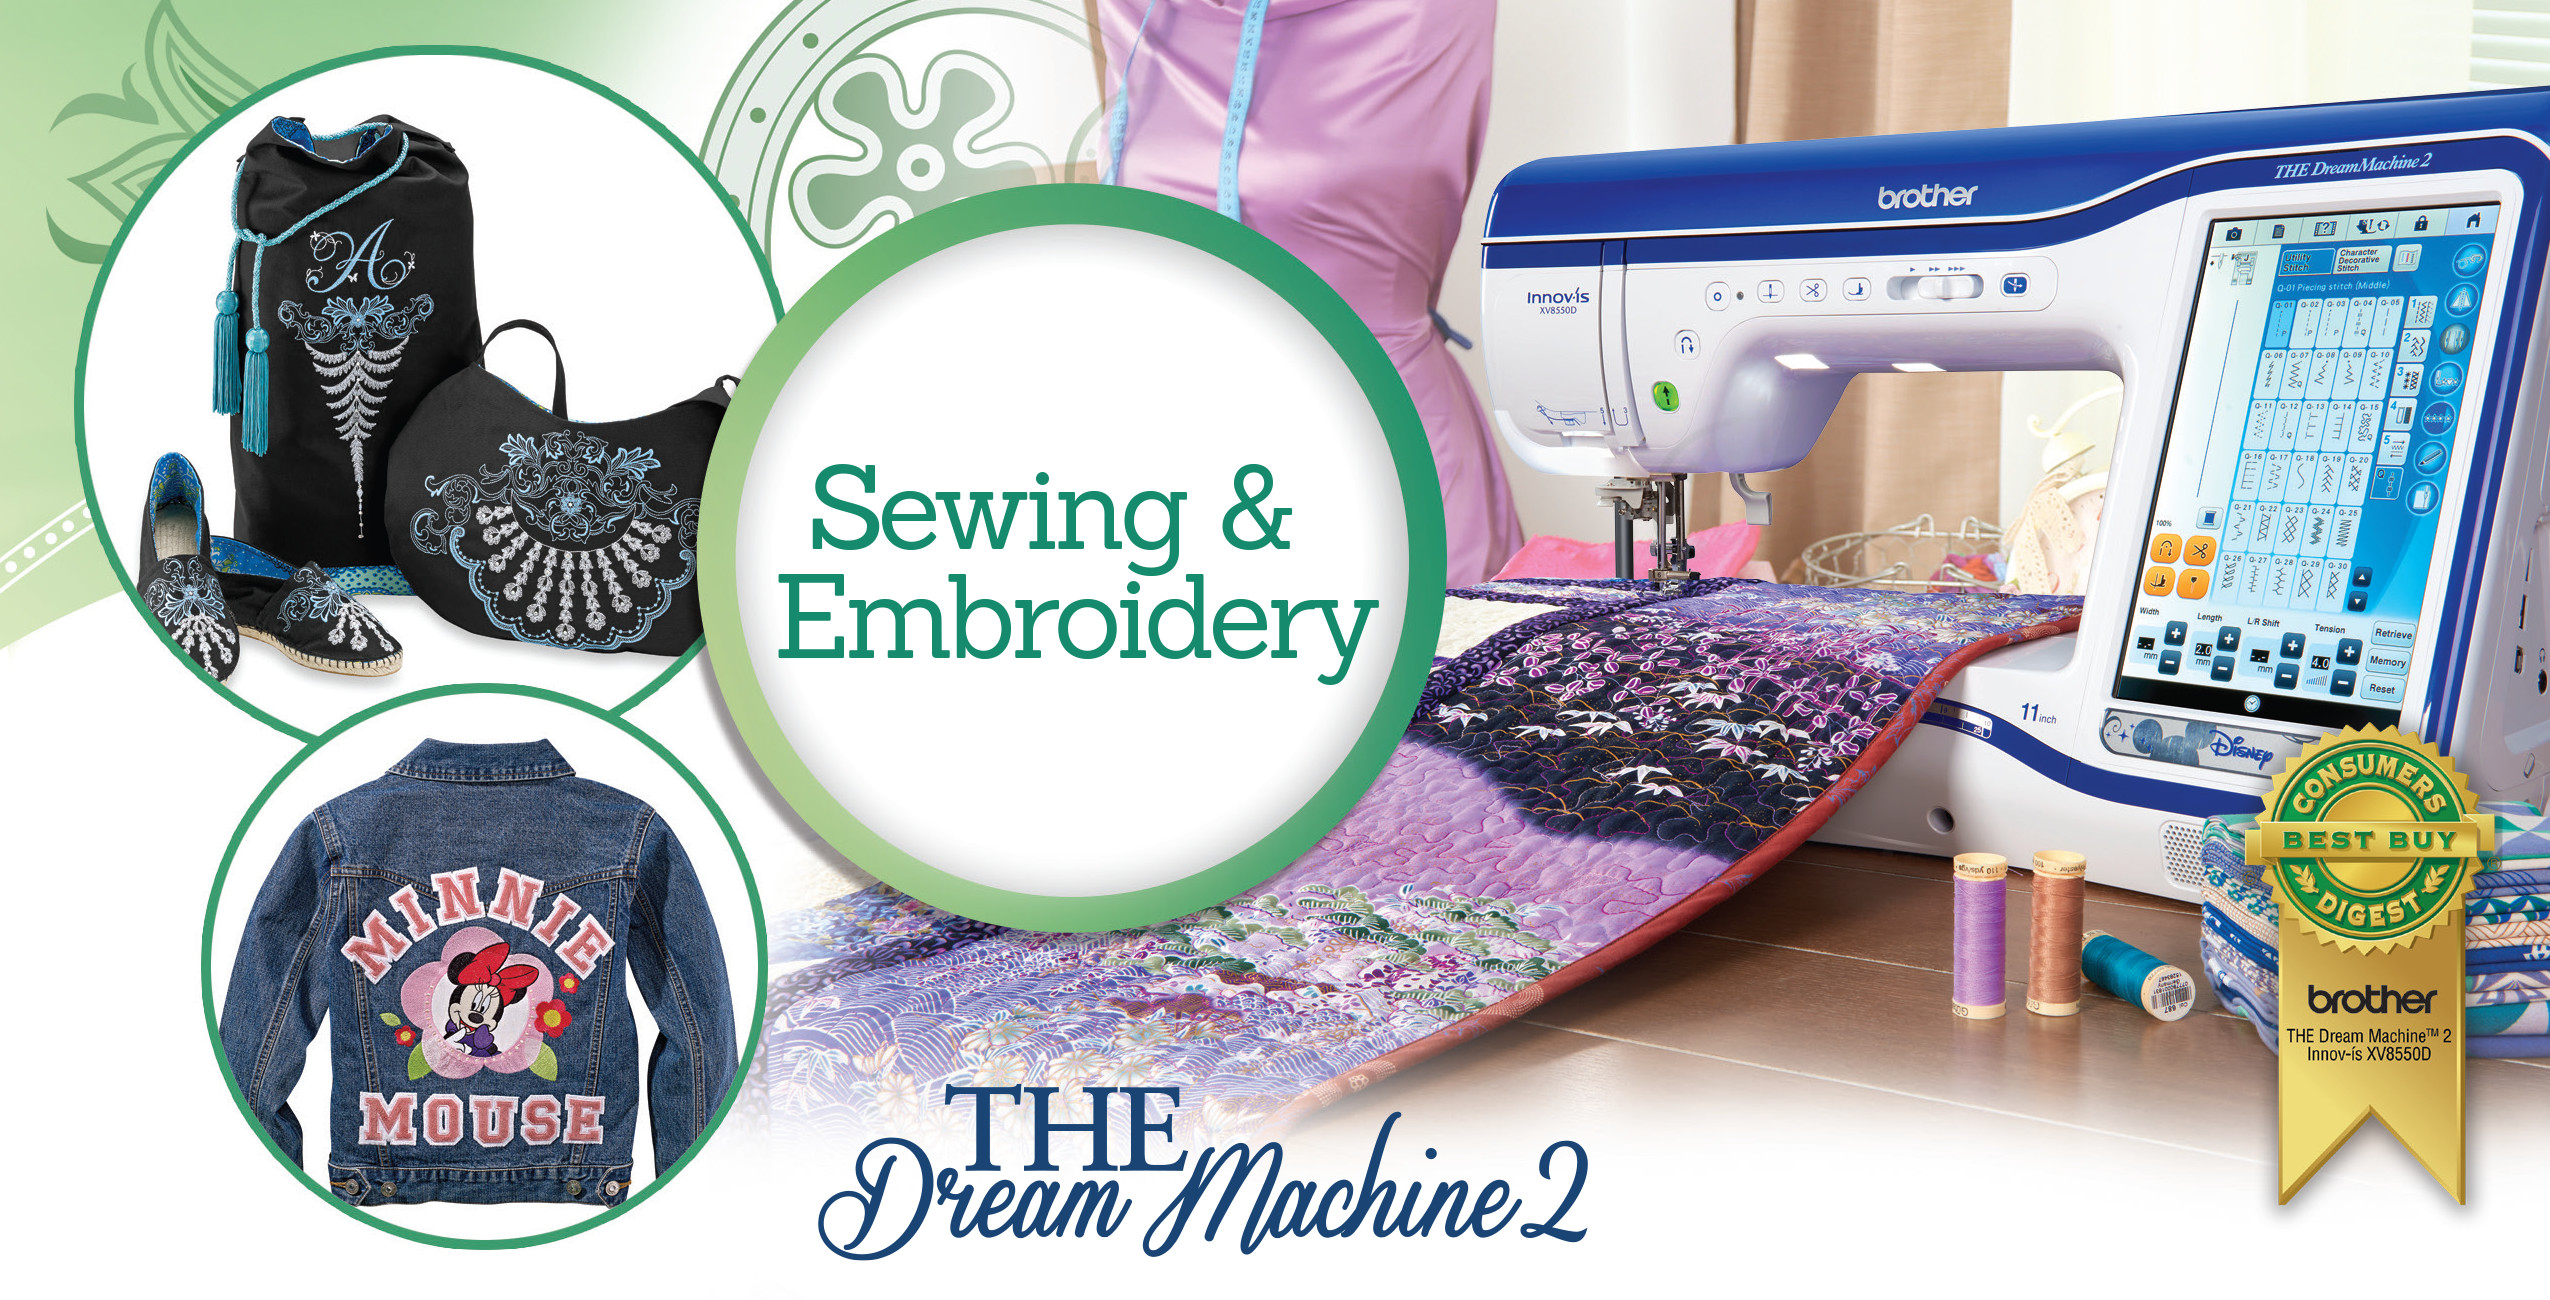 Brother Embroidery Machine Patterns Brother Dream Sewing Machine Dream Machine 2 Sewing Machine